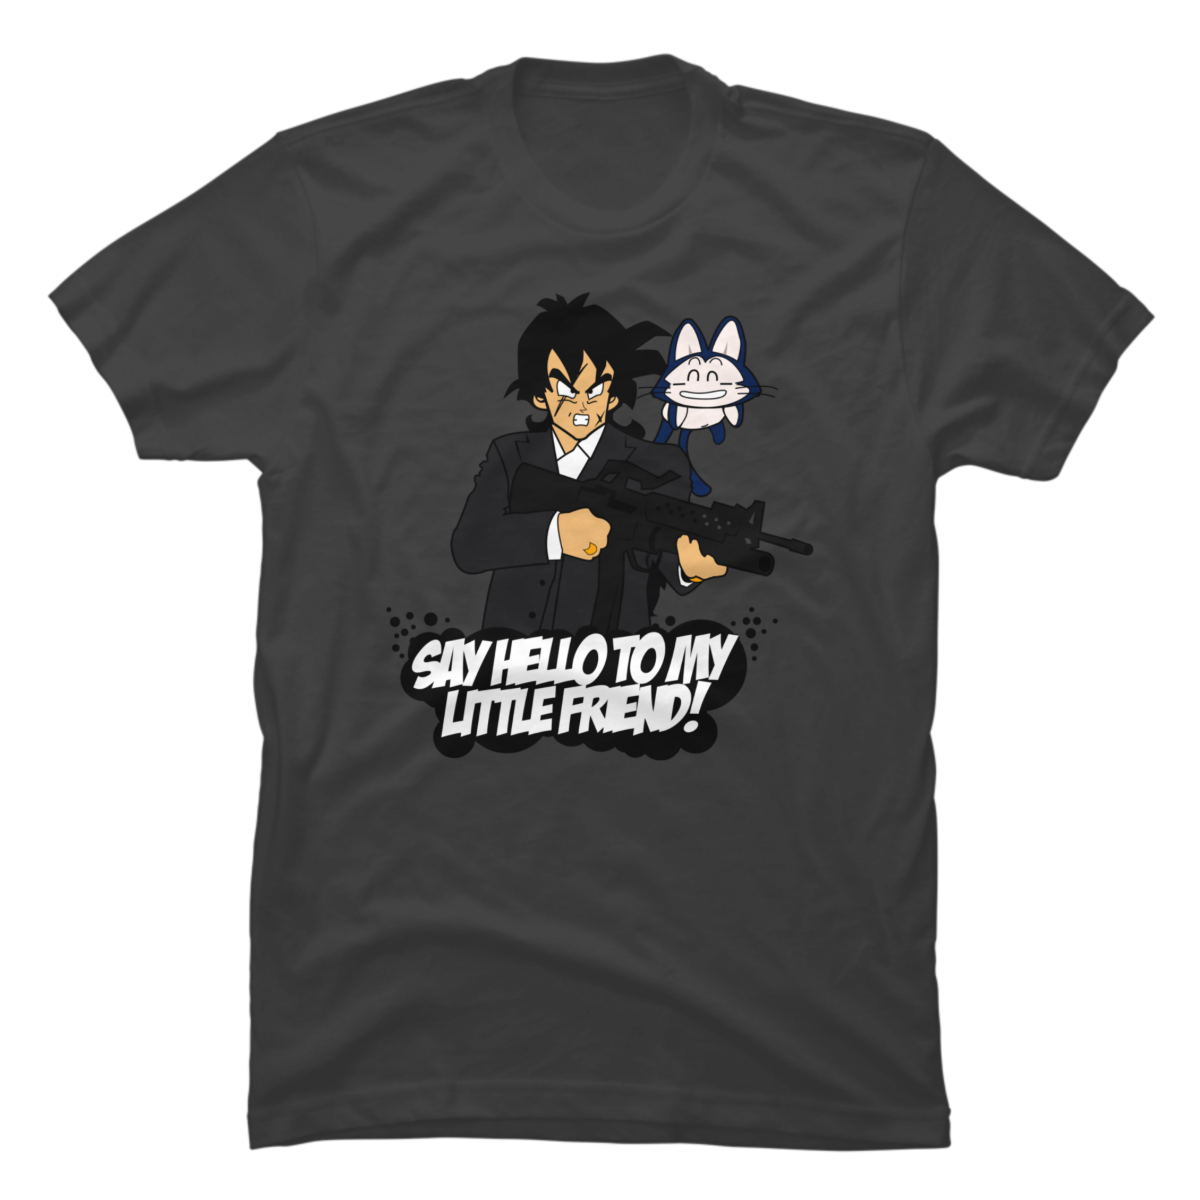 say hello to my little friend tshirt